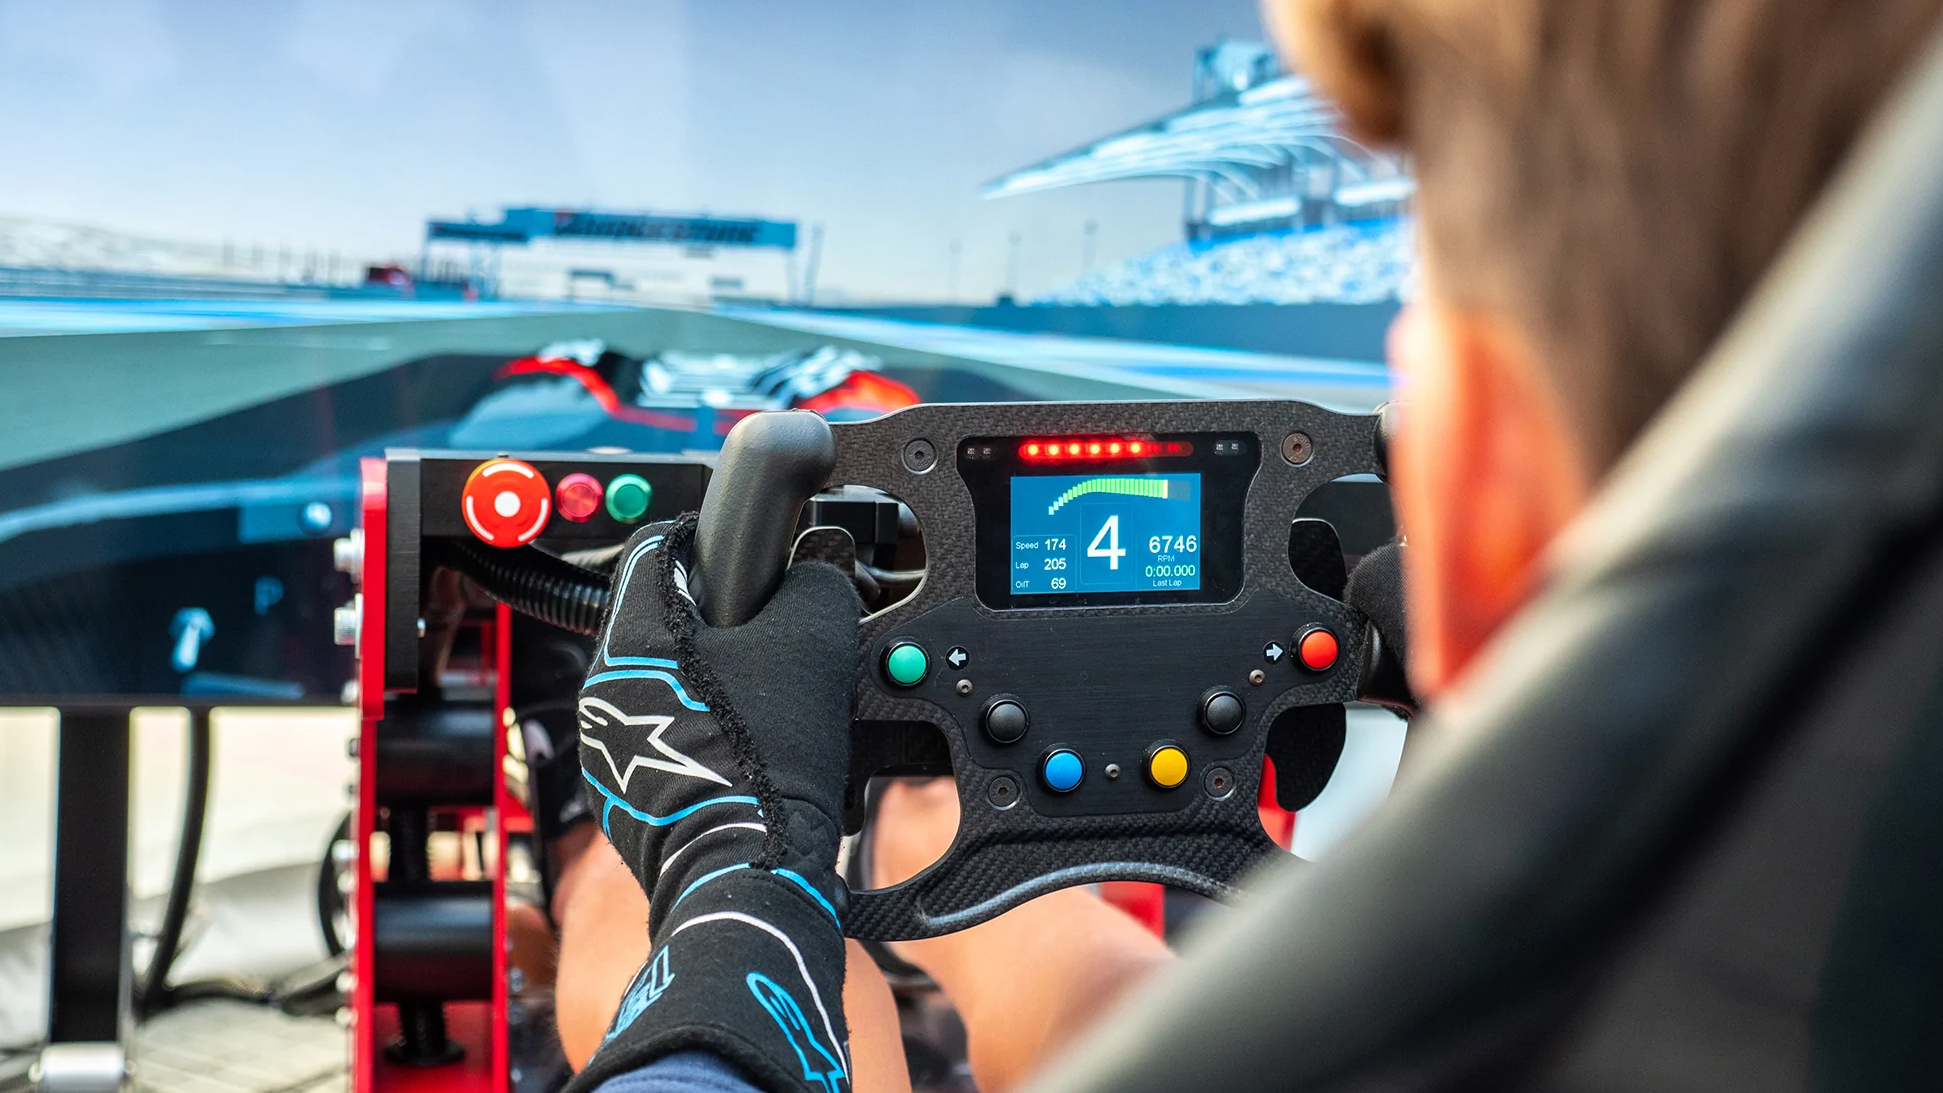  Pro athletes and wealthy gamers are spending thousands on these custom racing rigs 